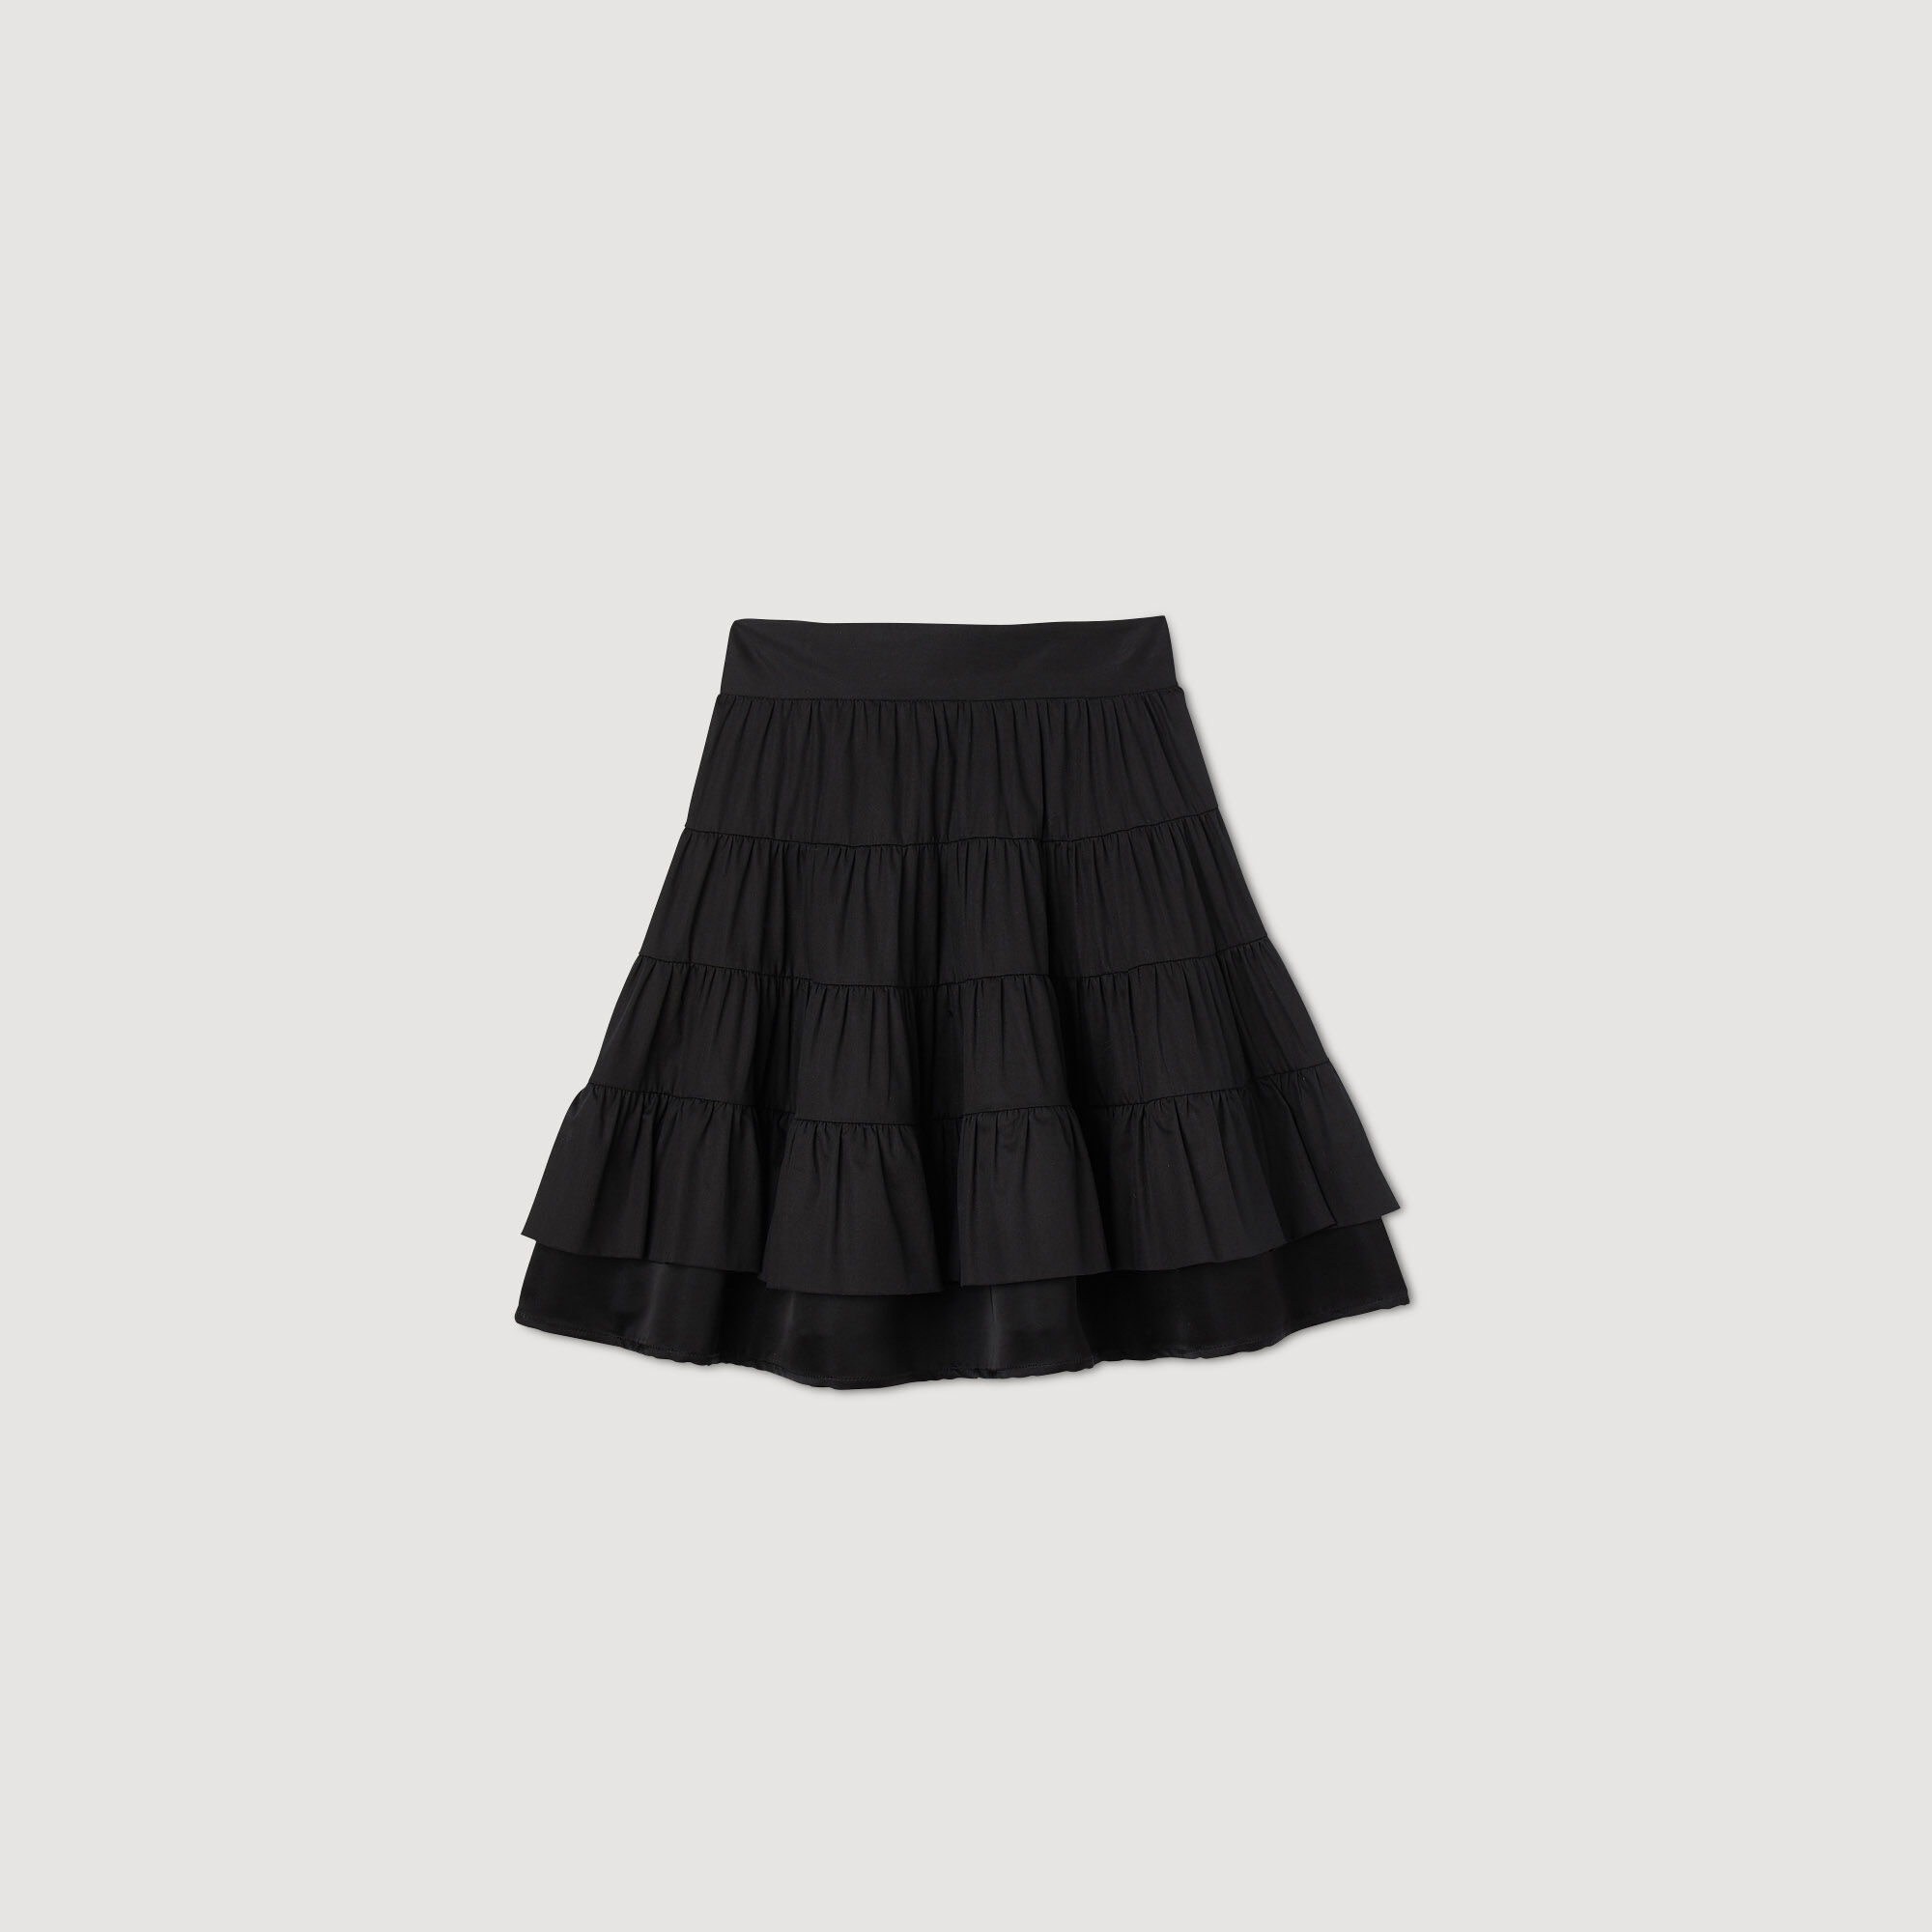 Tips for Choosing the Best Fabric for a Skirt